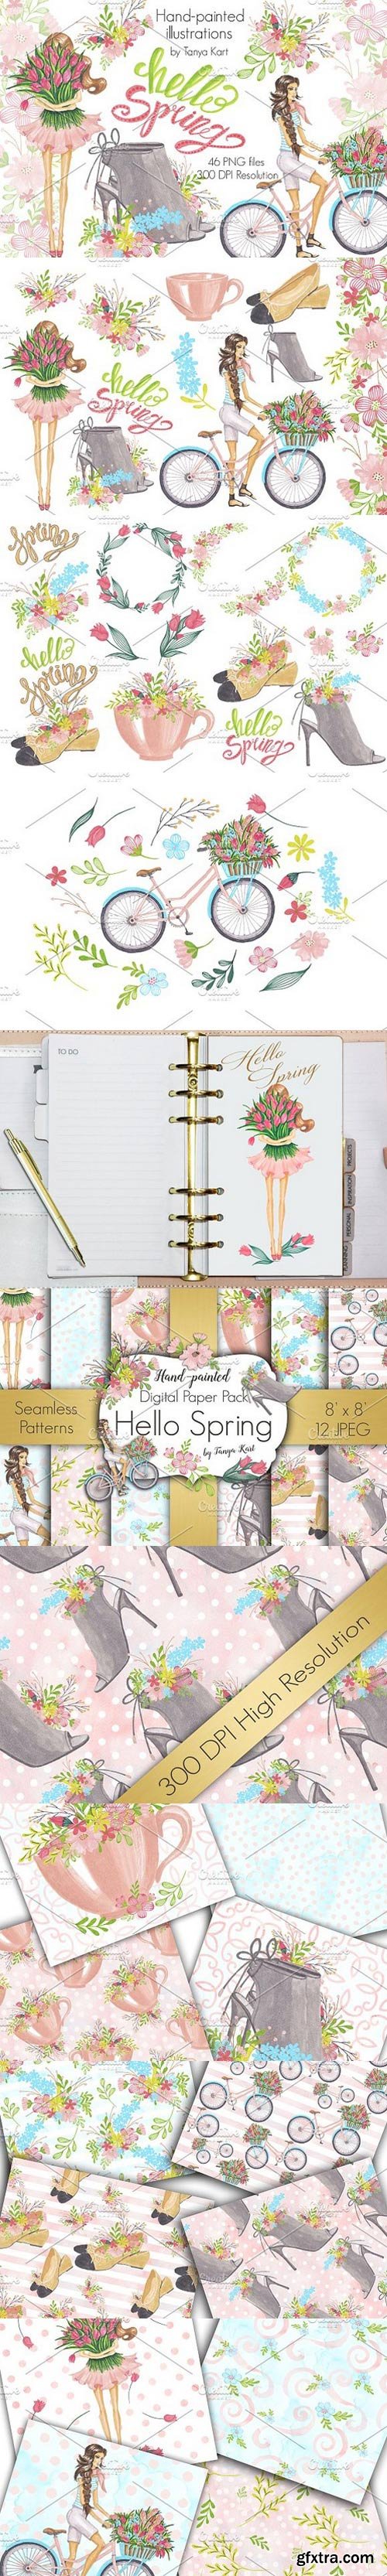 CM - Hello Spring Hand-painted Collection 1238622